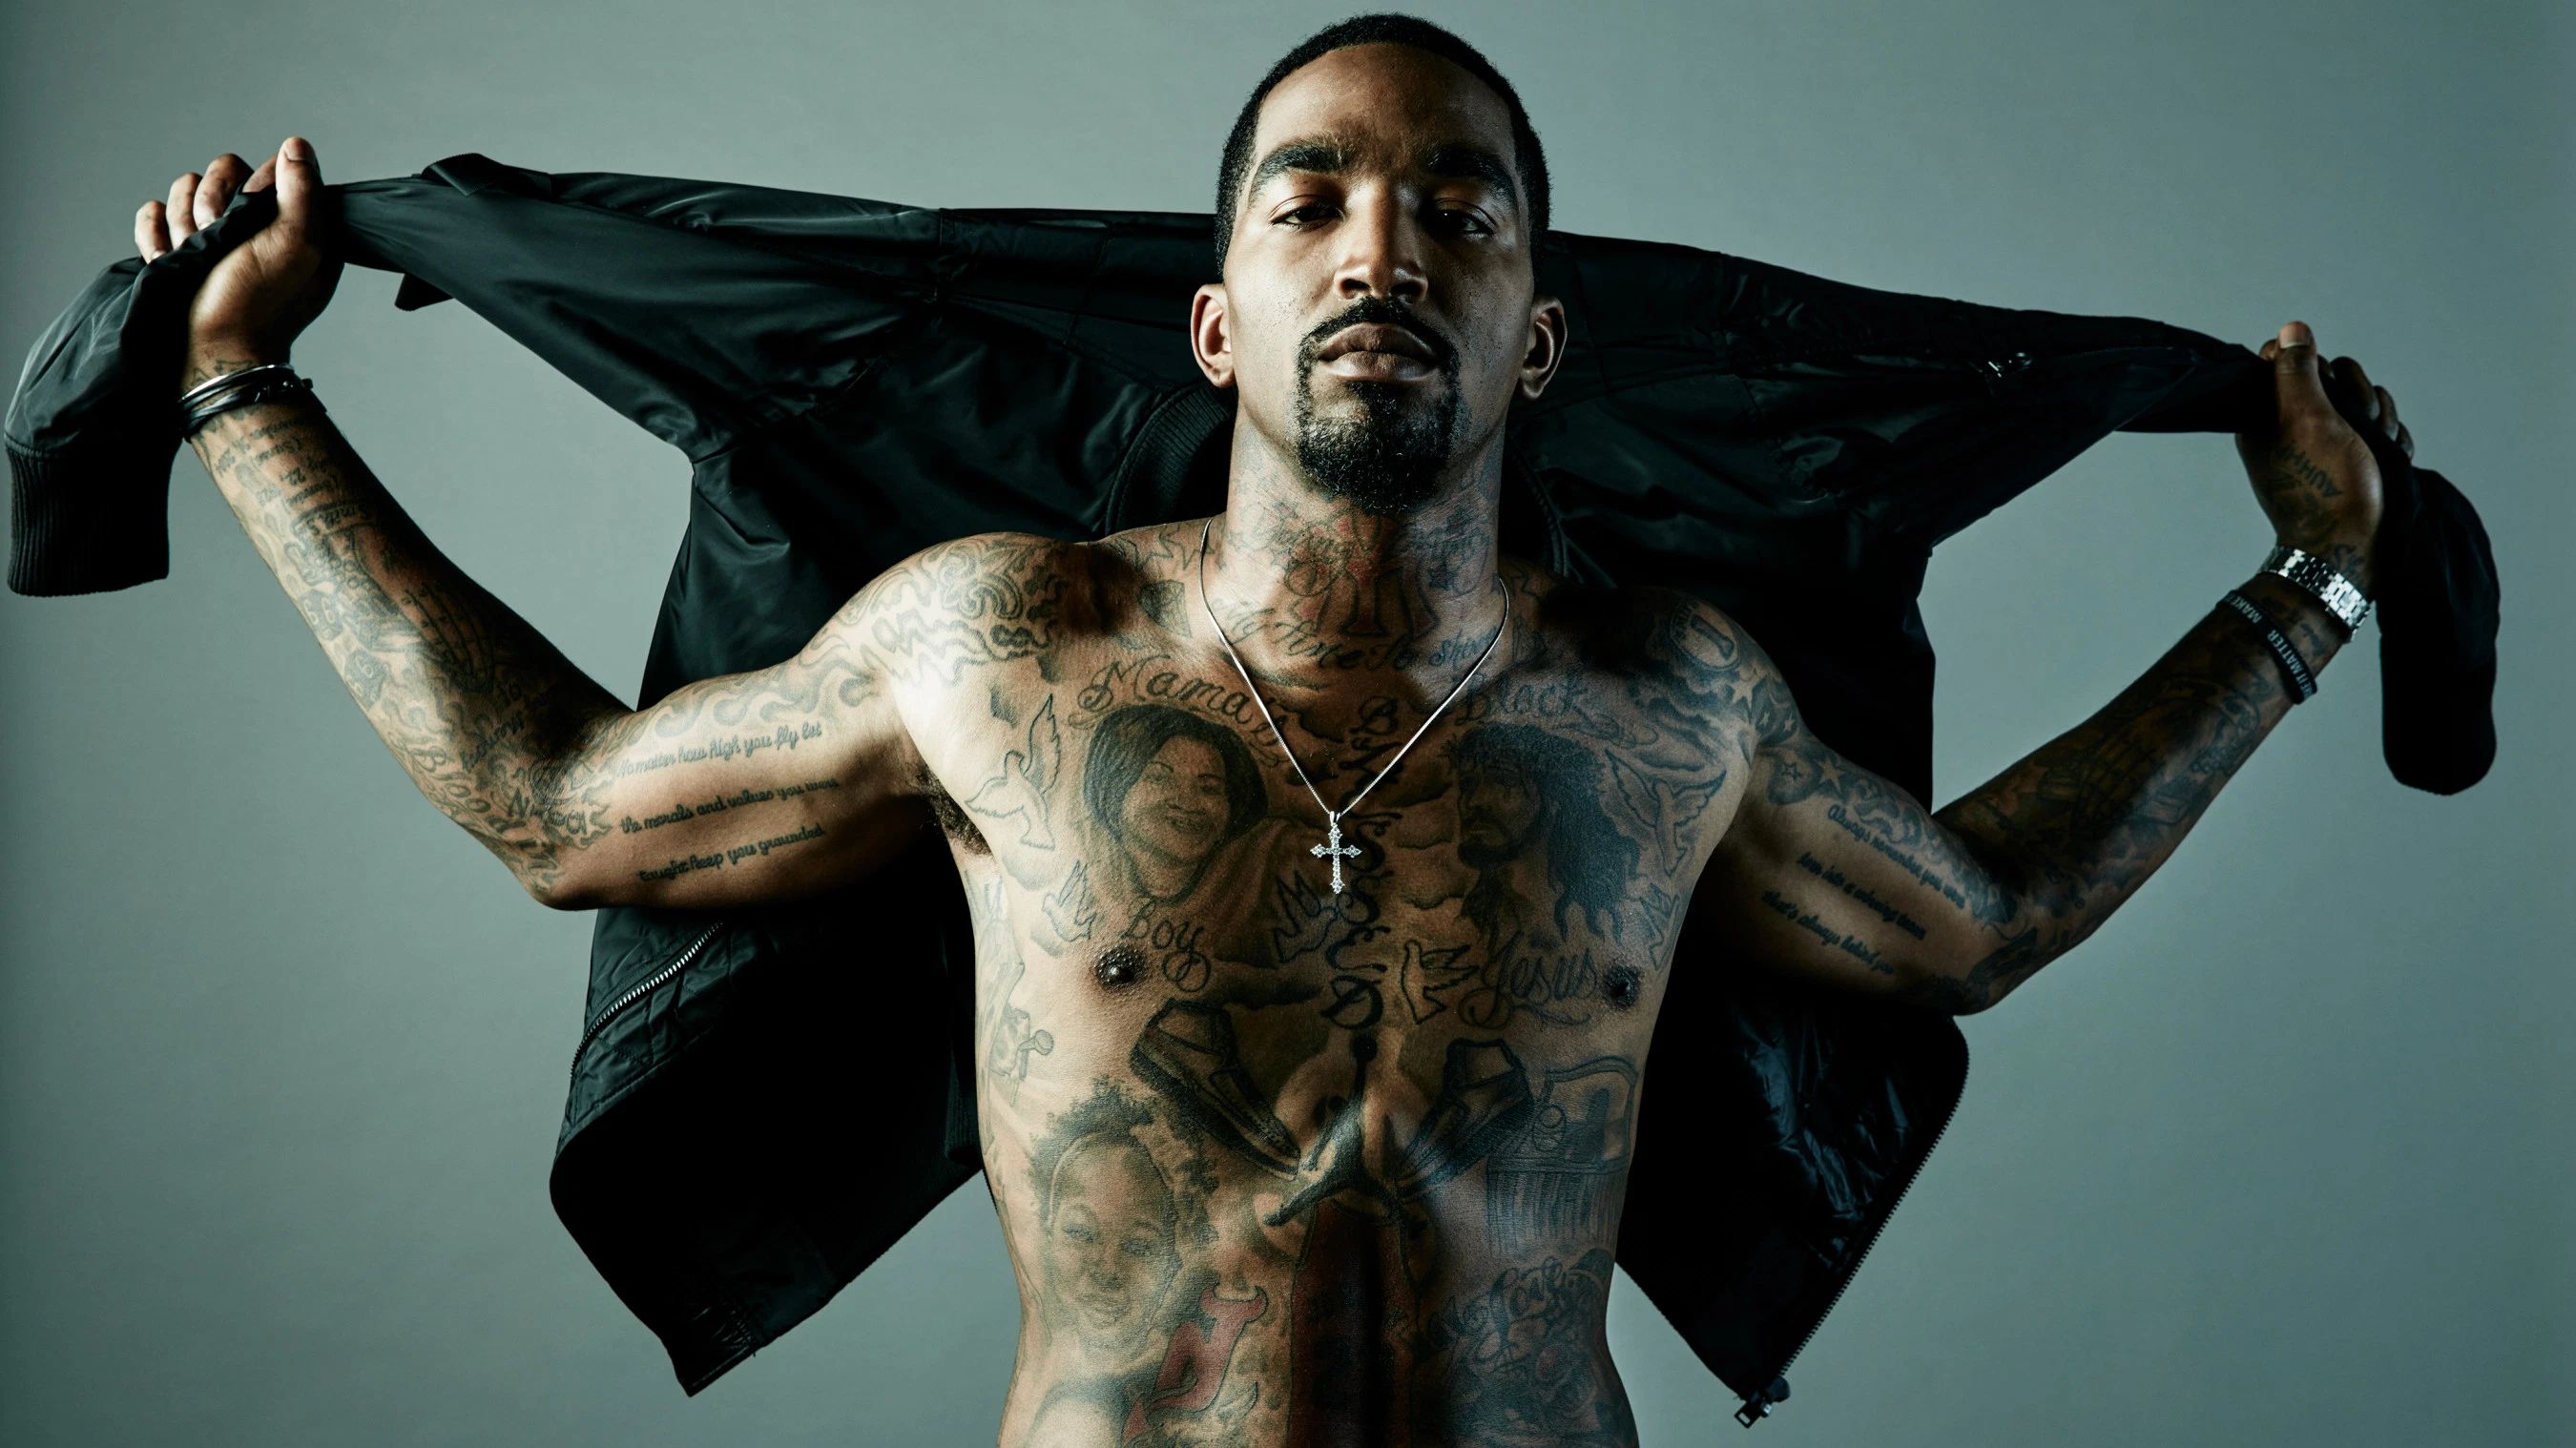 PC Wallpapers sports, j r smith, athlete, tattoo, basketball